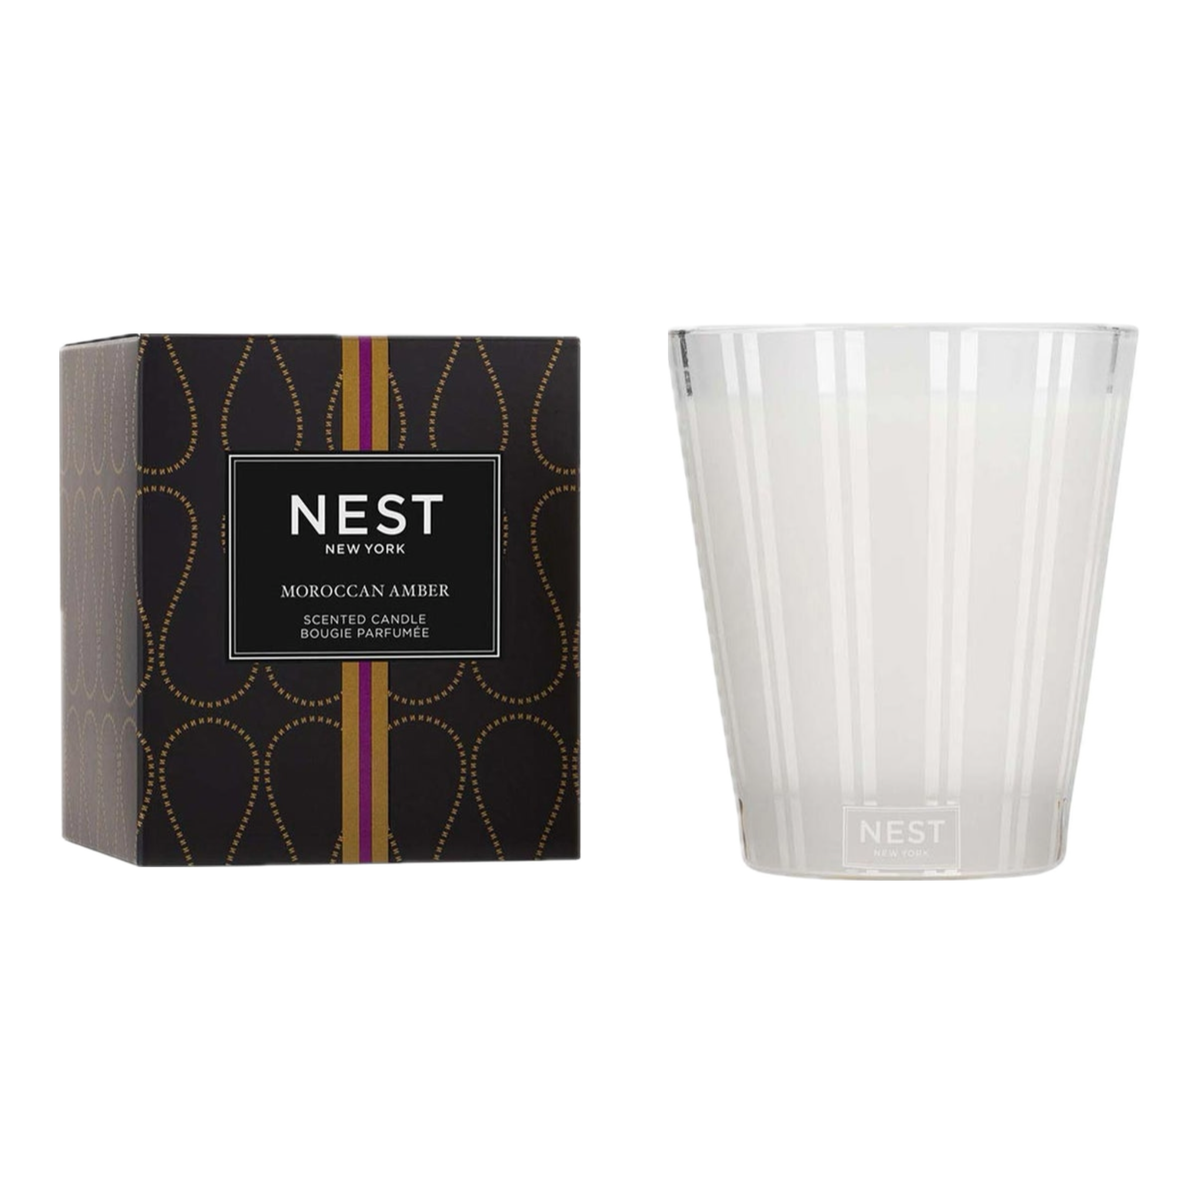 Product Image of Nest New York’s Moroccan Amber Classic Candle with Box